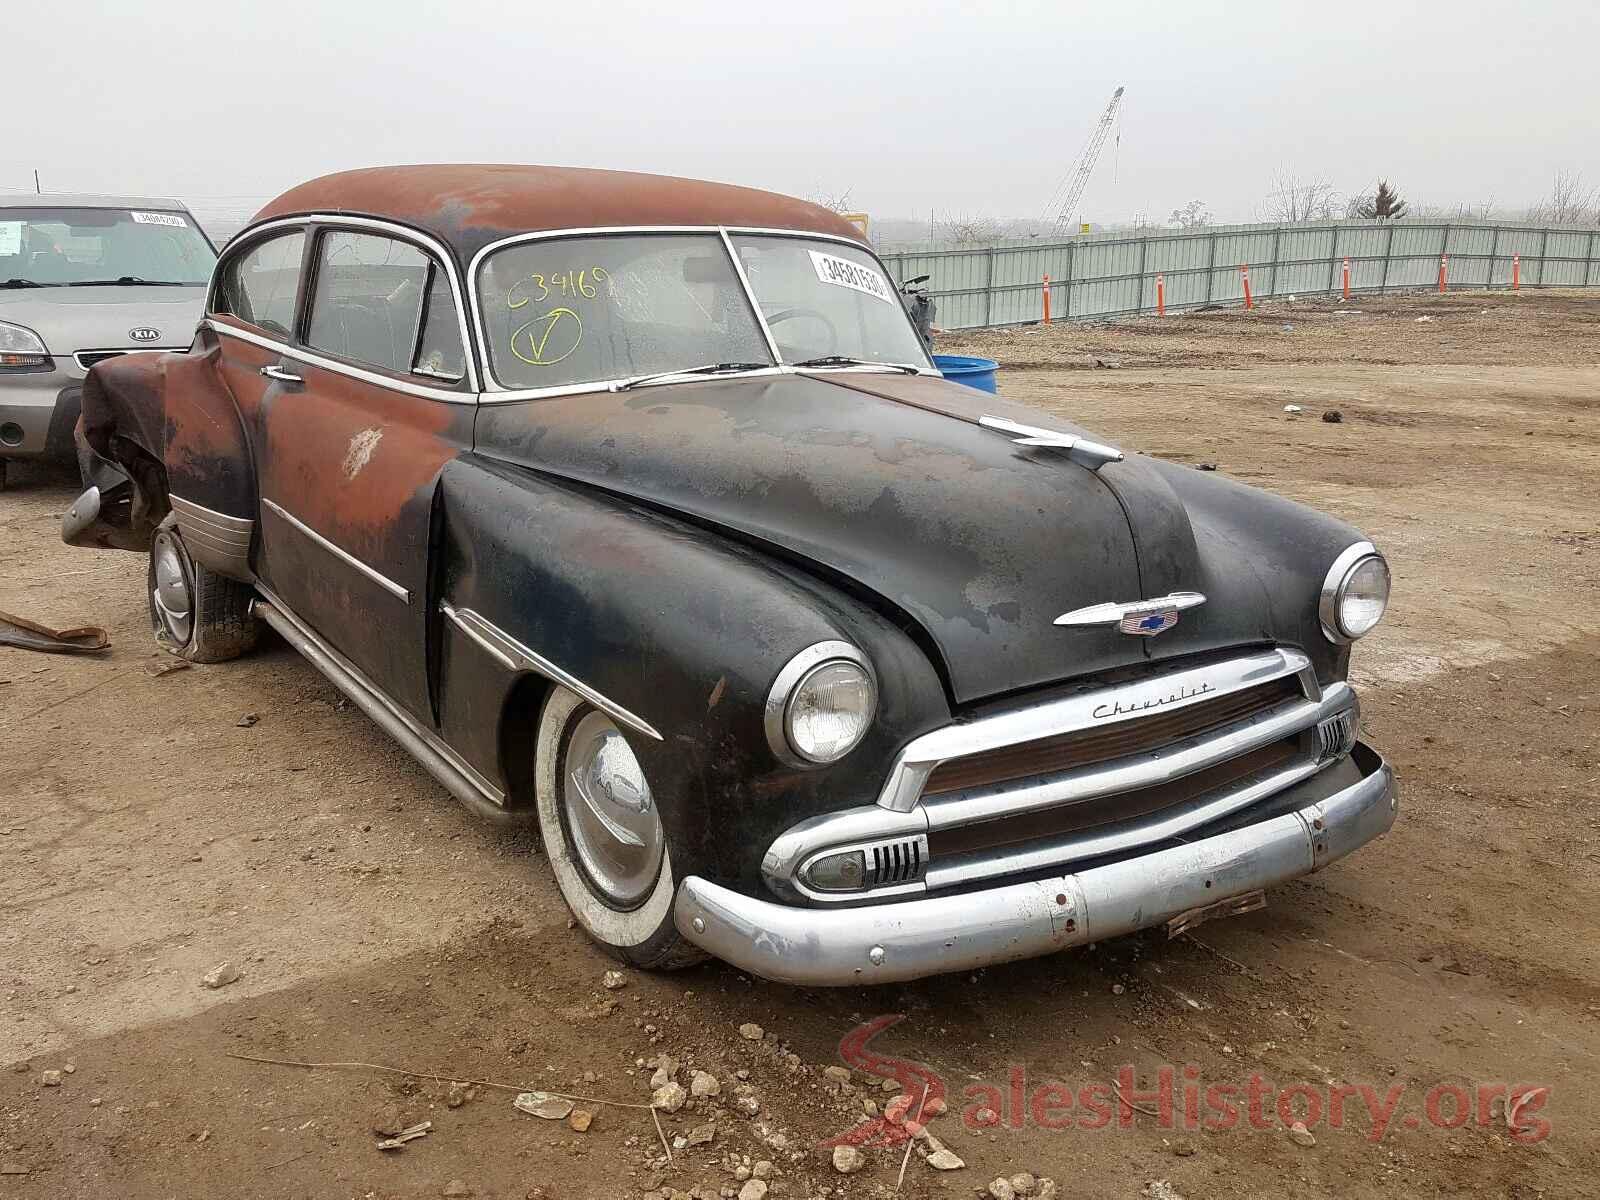 5JKC34169 1951 CHEVROLET ALL OTHER